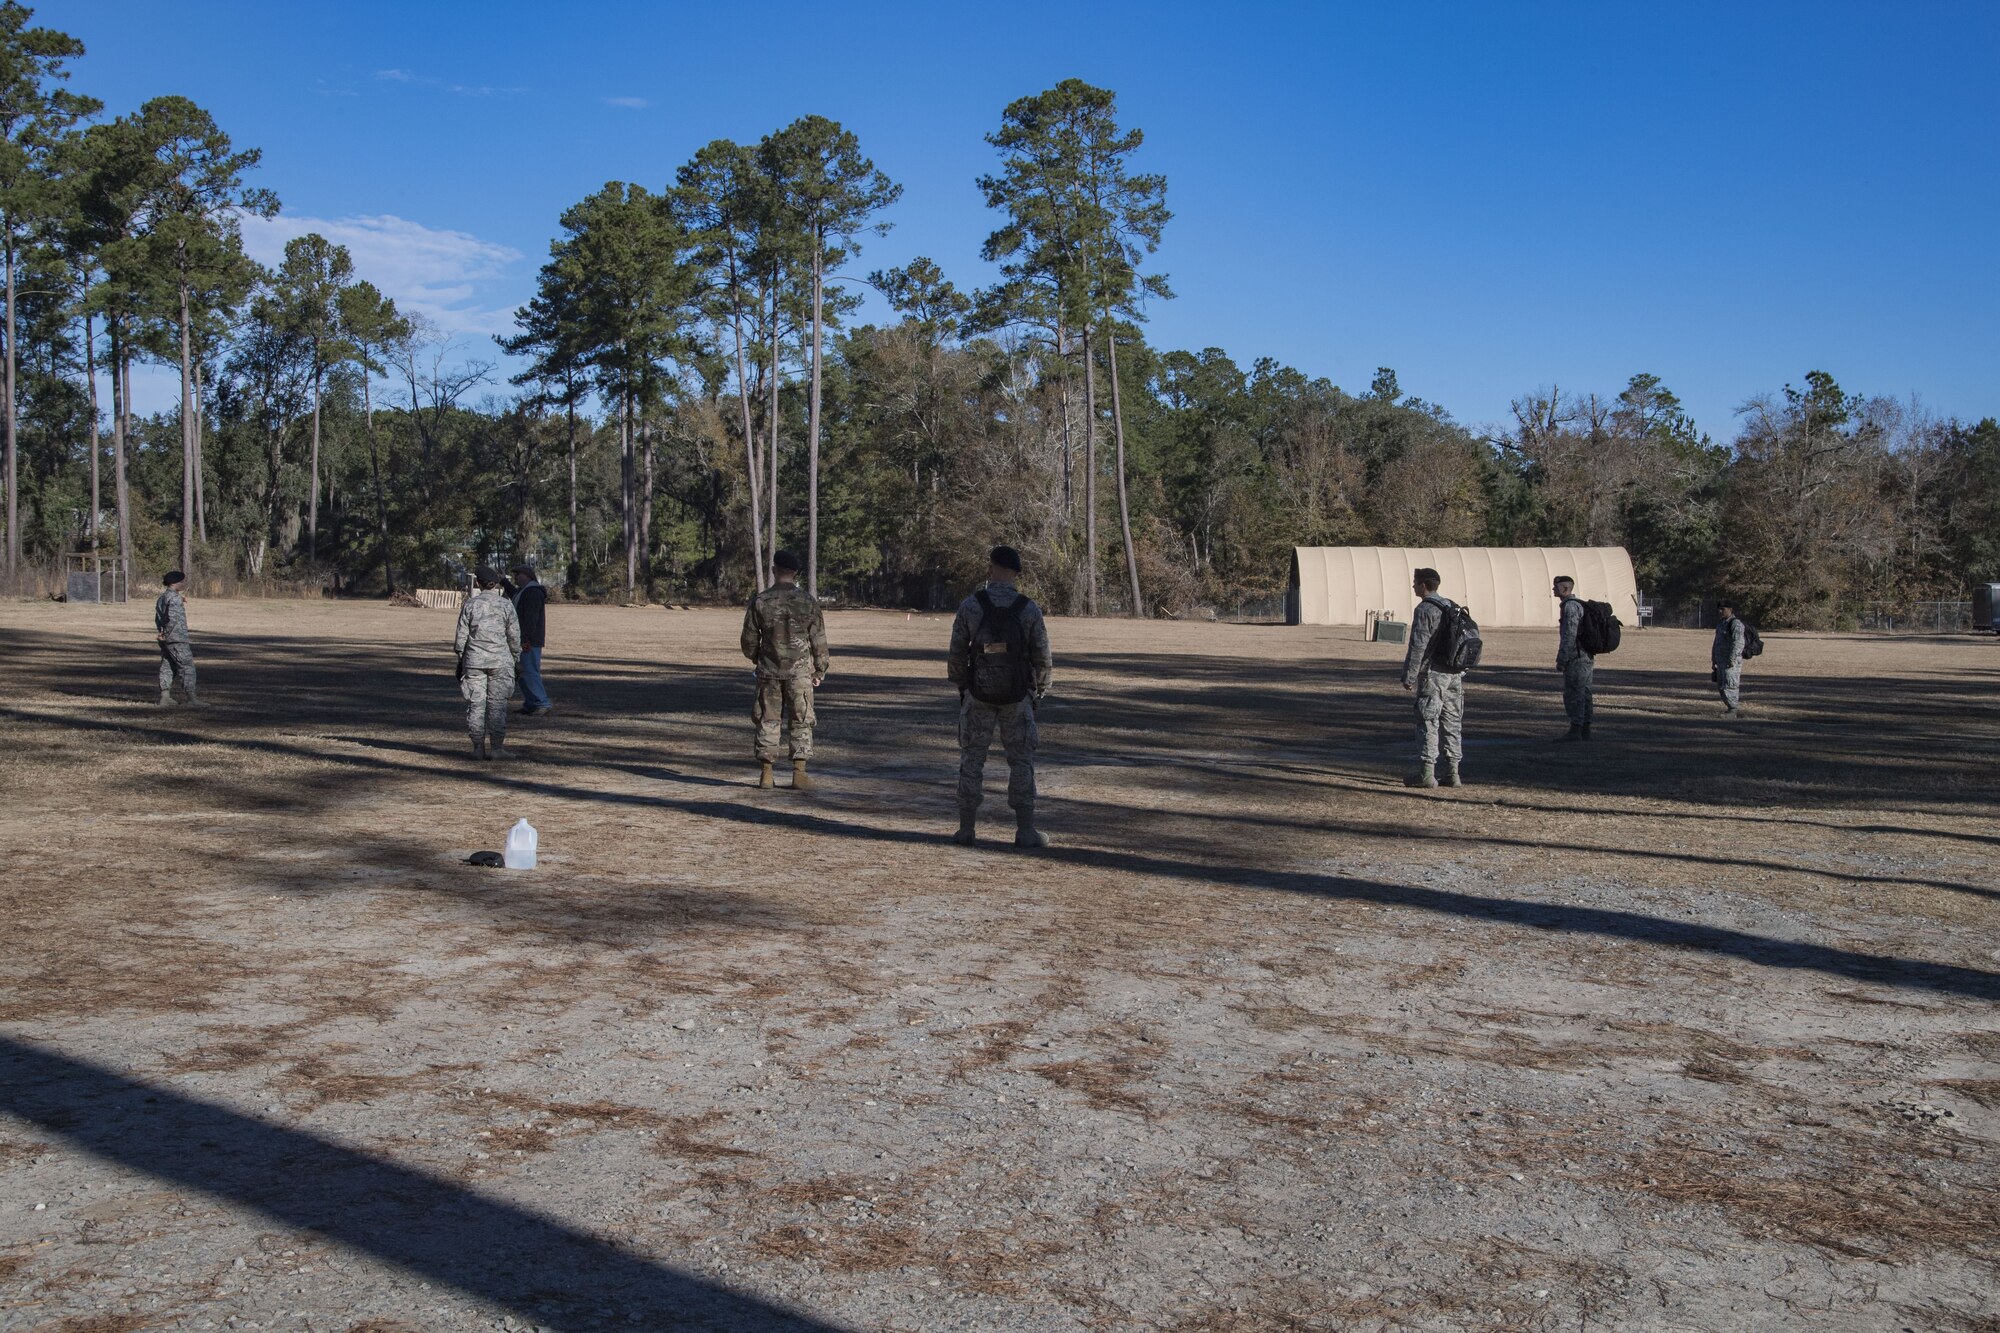 Members of the 820th Base Defense Group practice sweep formations during counter-improvised explosive device training, Jan. 24, 2018, at Moody Air Force Base, Ga. The 820th BDG defenders on how to detect IEDs and counter measures to take when one is found. IEDs have become one of the most common forms of attack in the Middle East since 2003. (U.S. Air Force photos by Staff Sgt. Eric Summers Jr.)